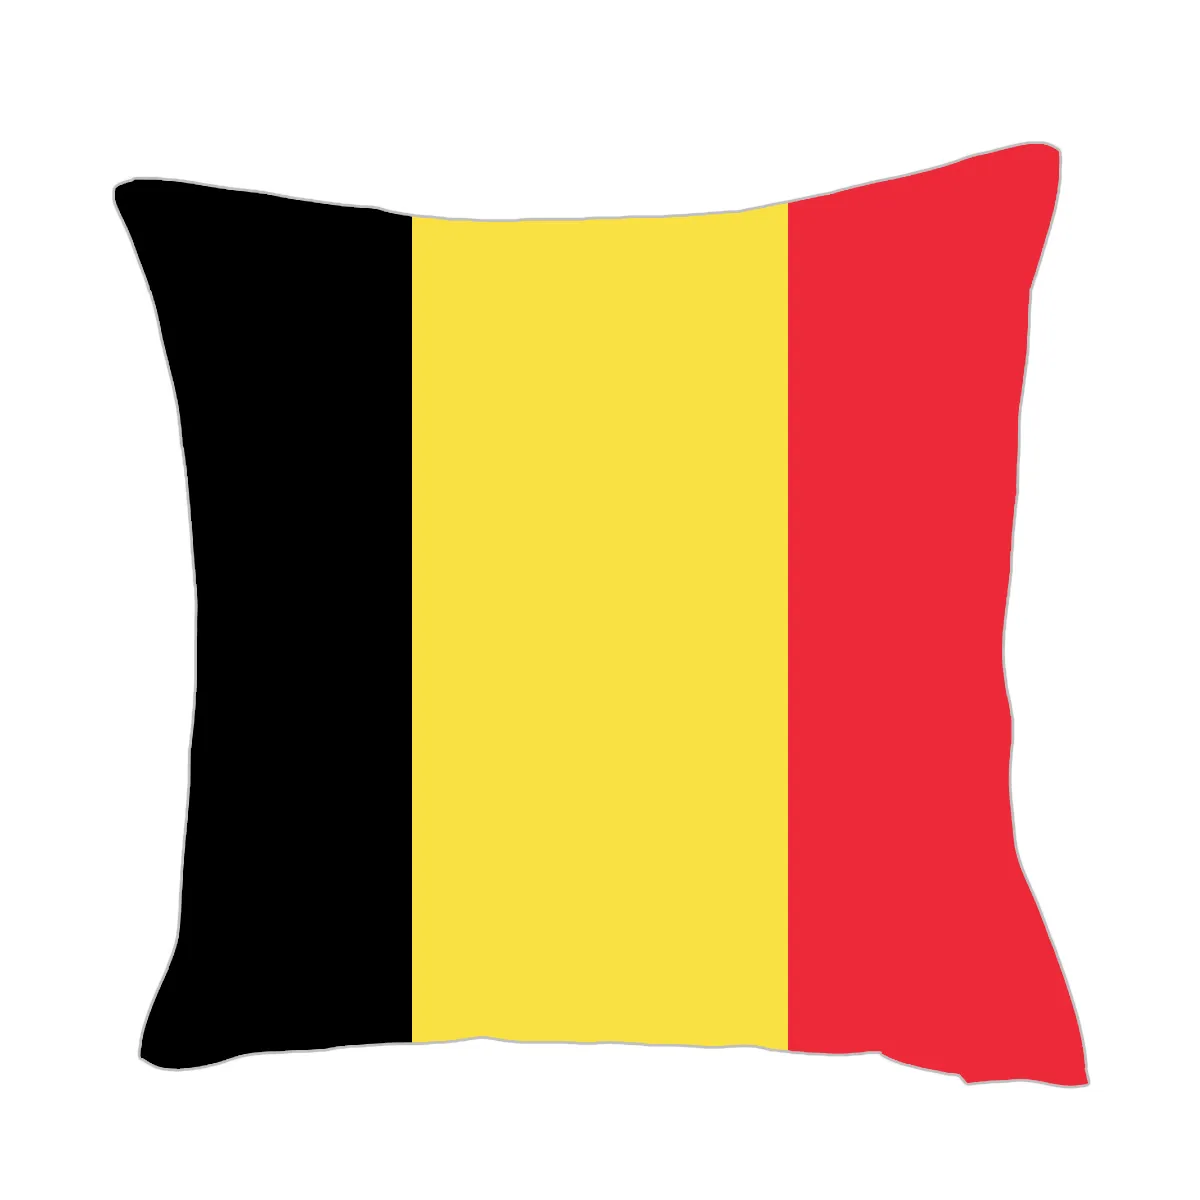 Belgien Flagg Throwpillow Cover Factory Supply Good Price Polyester Satin Pillow Cover